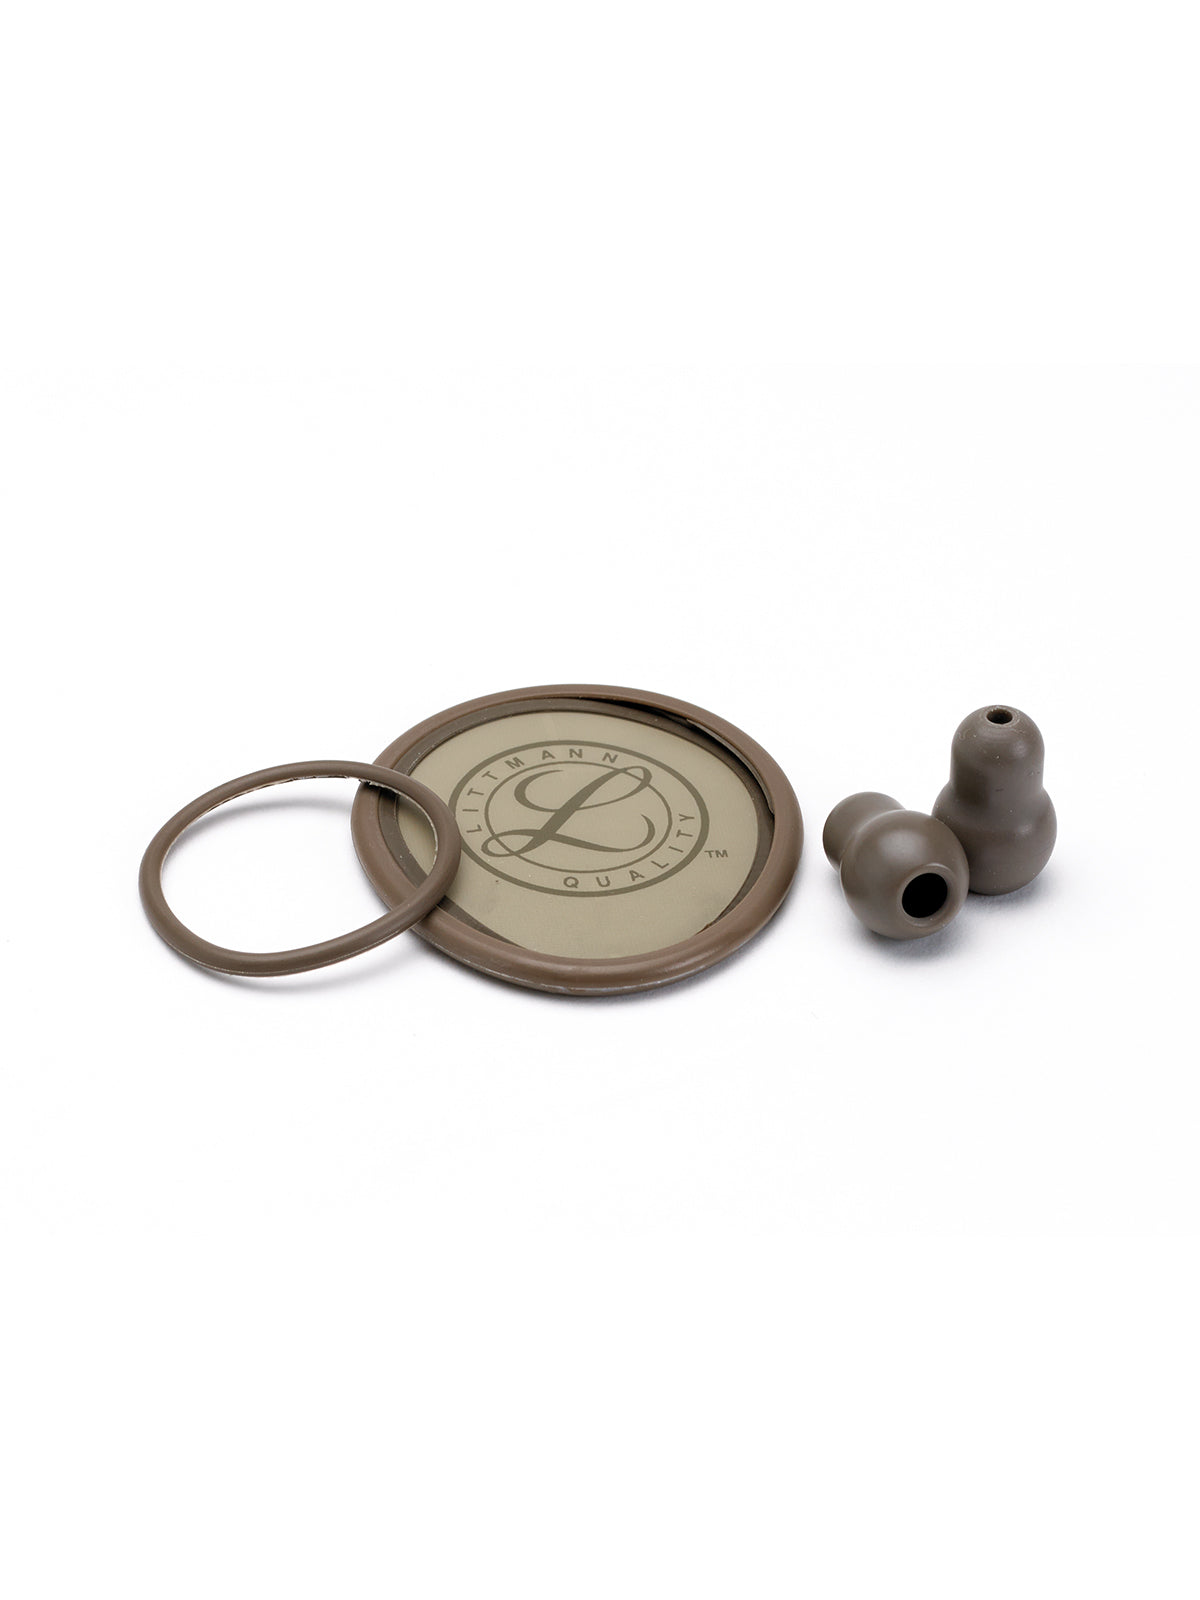 Stethoscope Spare Parts Kit, Lightweight II S.E - Light Brown